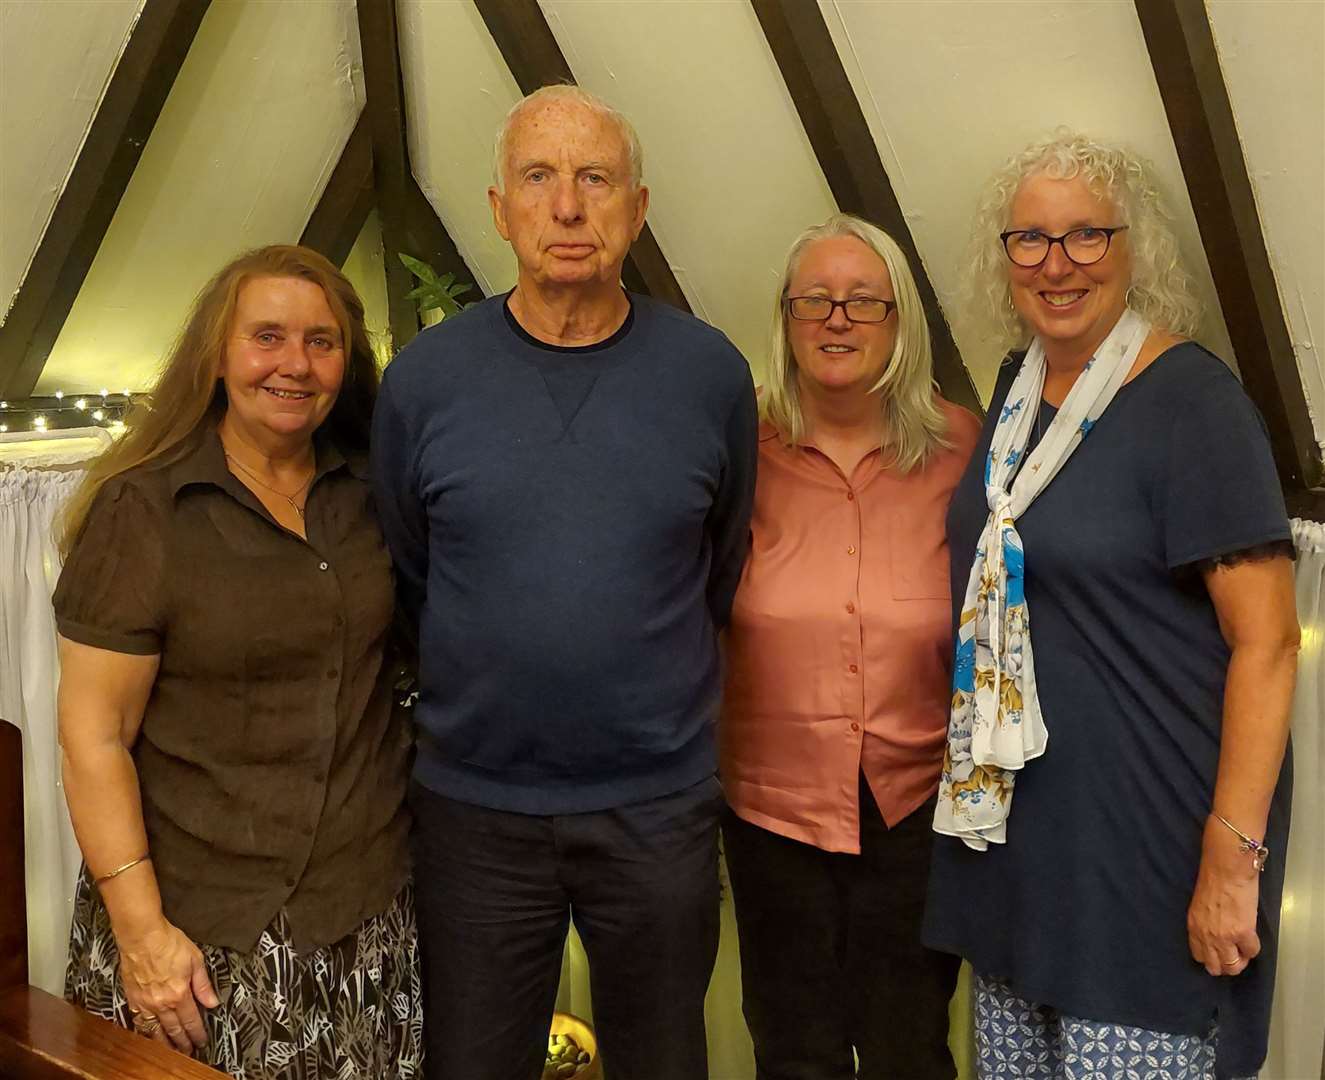 East Kent Lawn Tennis Association's committee at their 60th anniversary lunch. From left to right, new president Vanessa Webb, treasurer Graham Millar, newly-appointed committee member Jo Jacob King and secretary Susy Newell